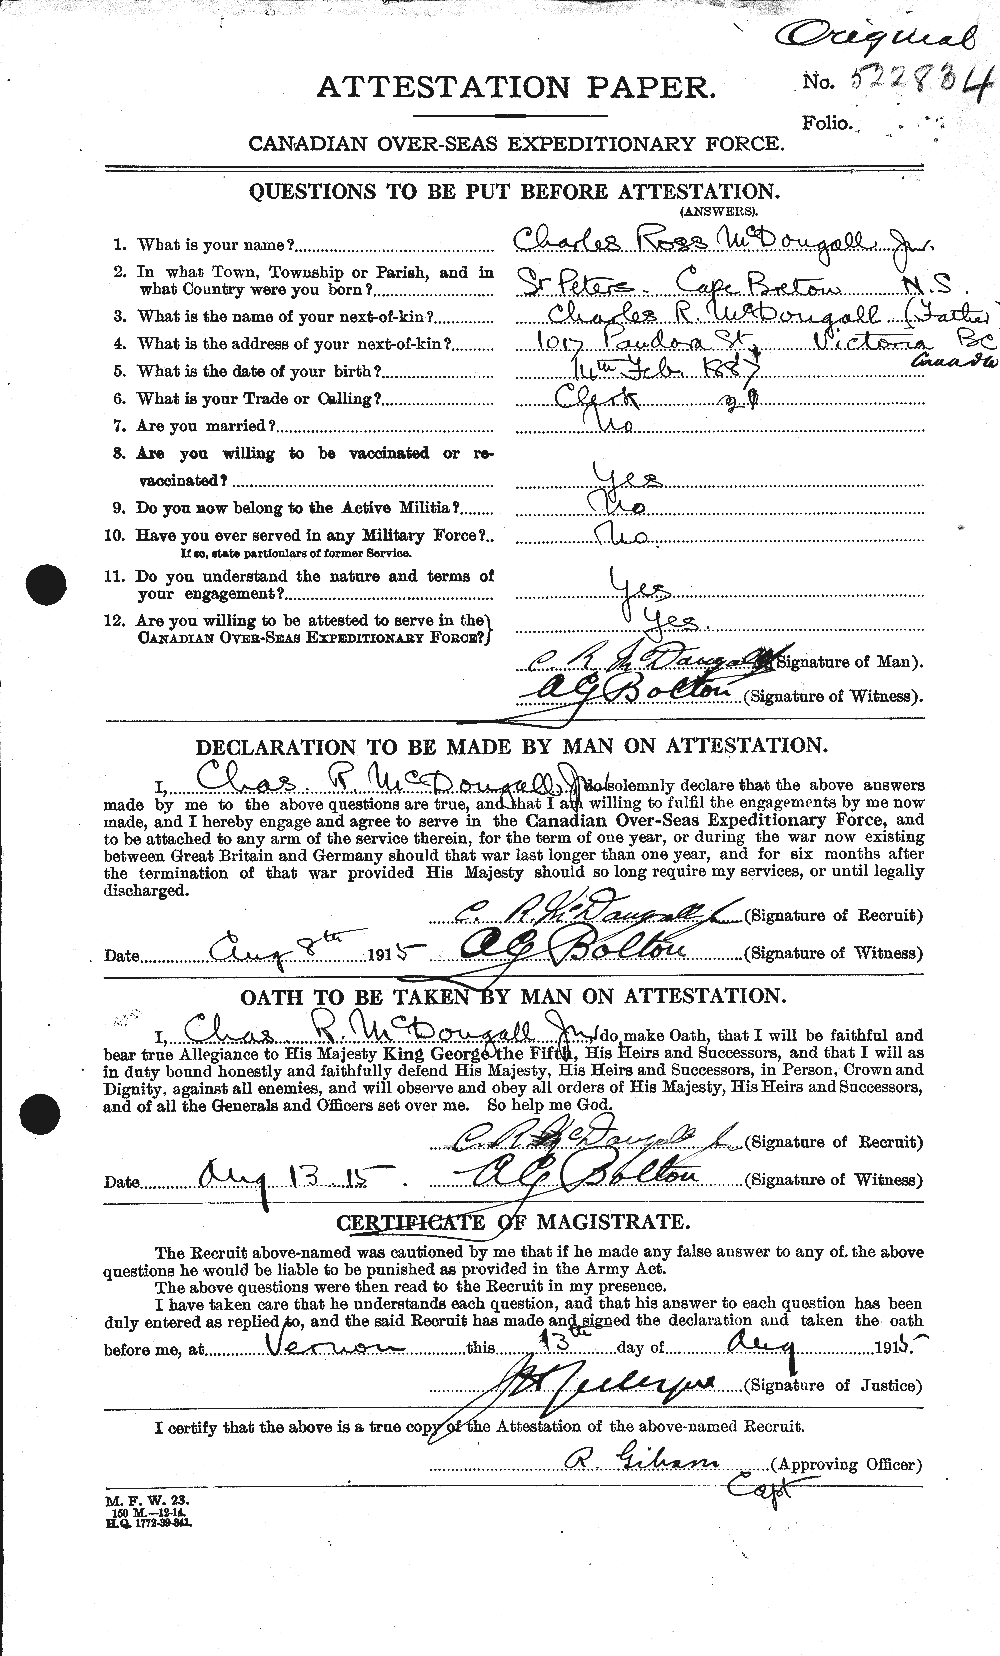 Personnel Records of the First World War - CEF 525282a